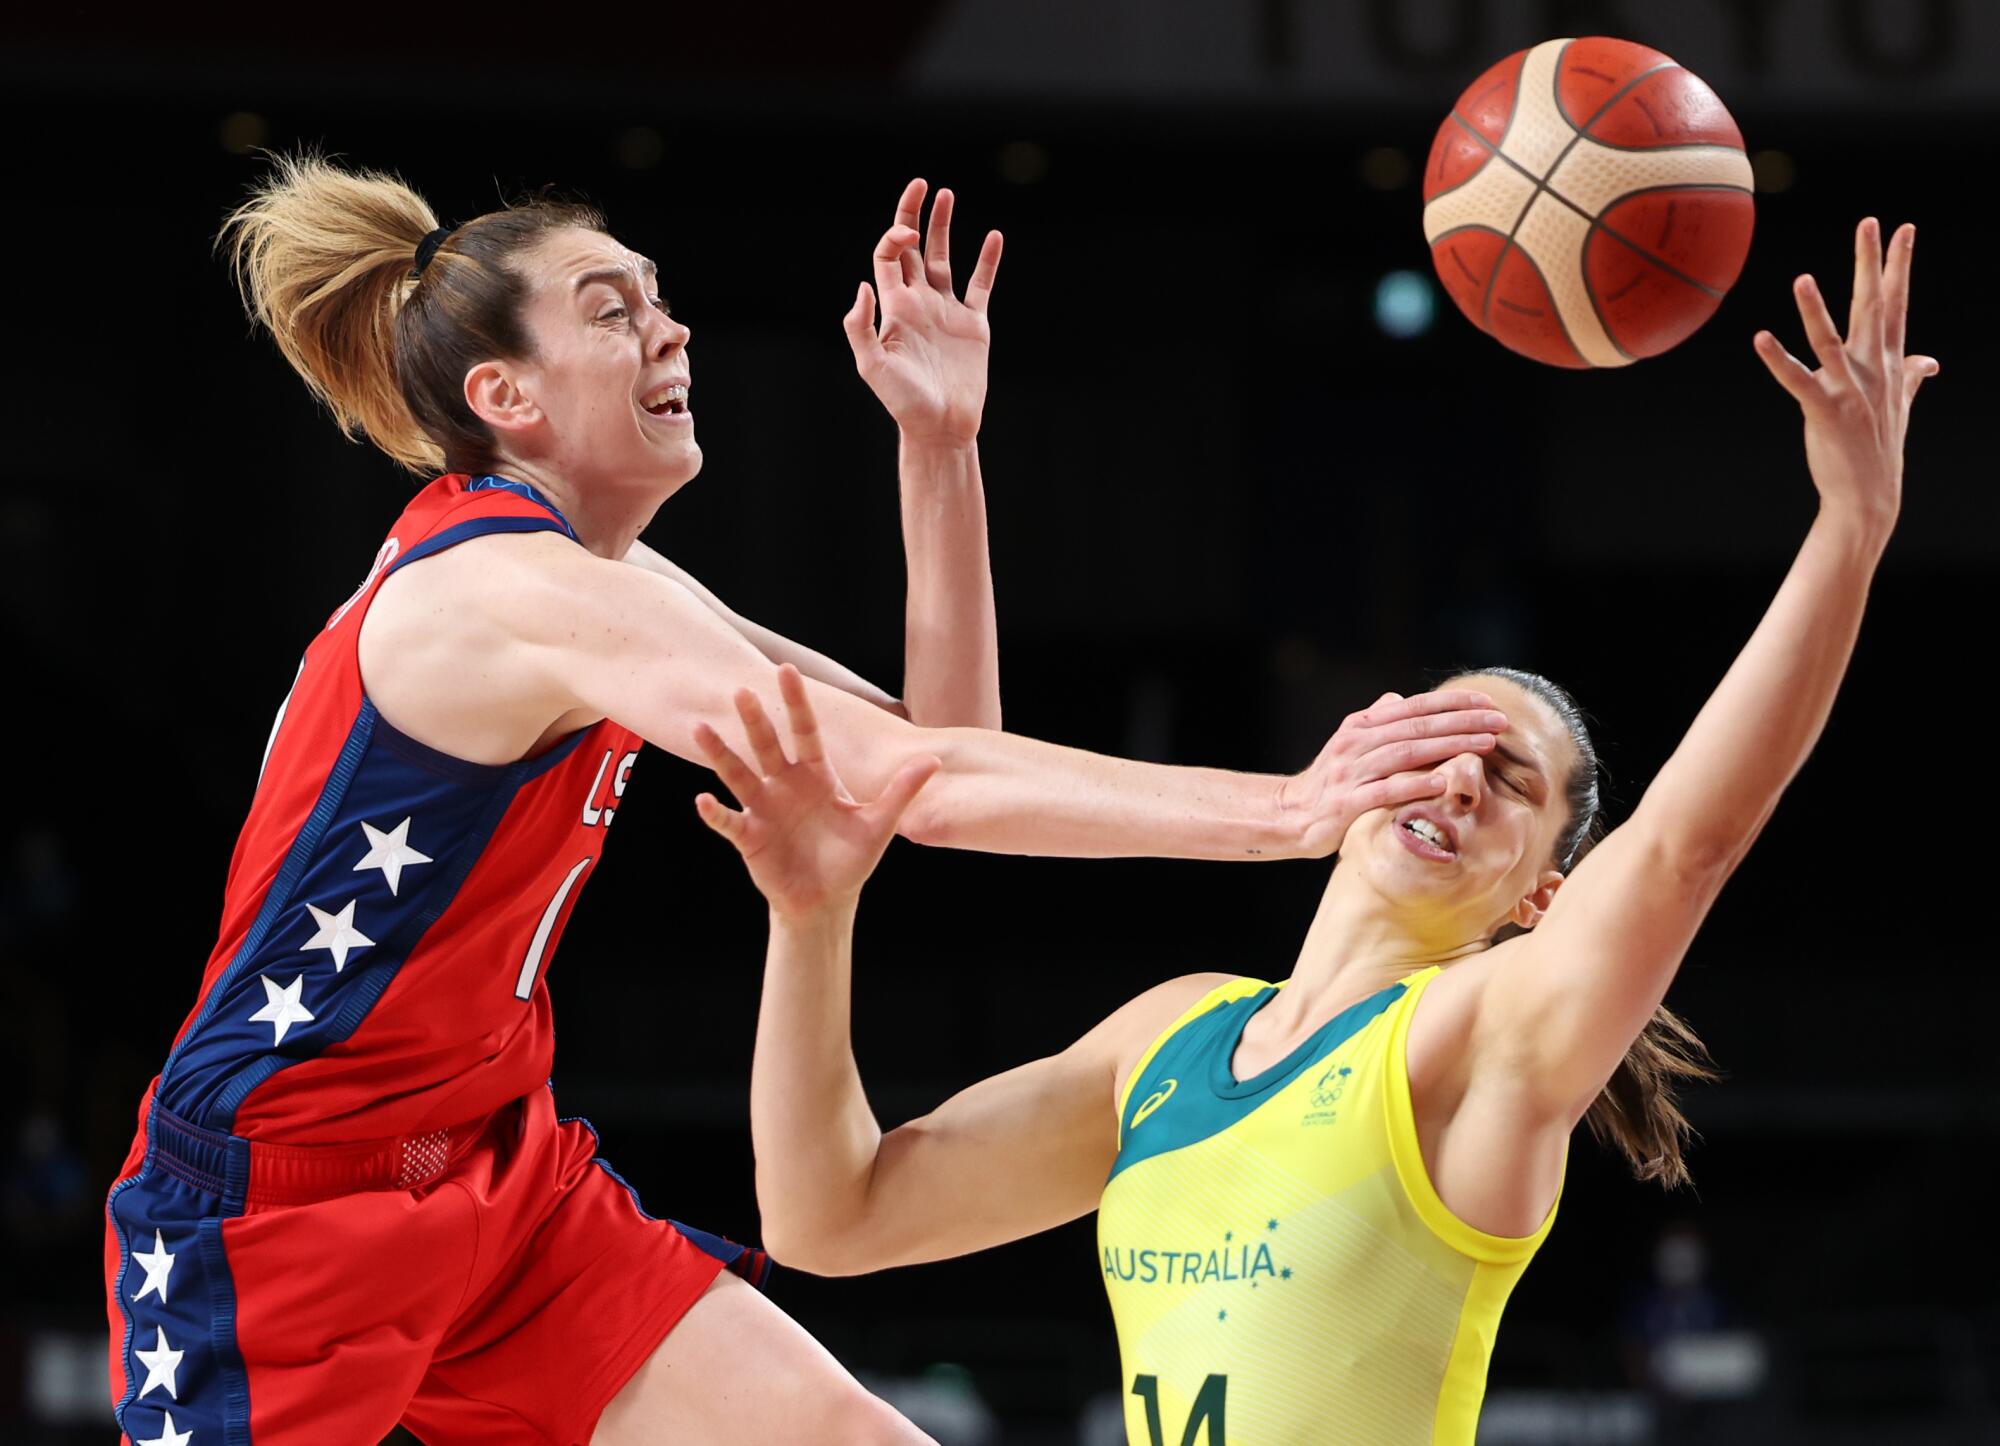 As she leaps, Breanna Stewart's hand is planted in the face of Marianna Tolo.